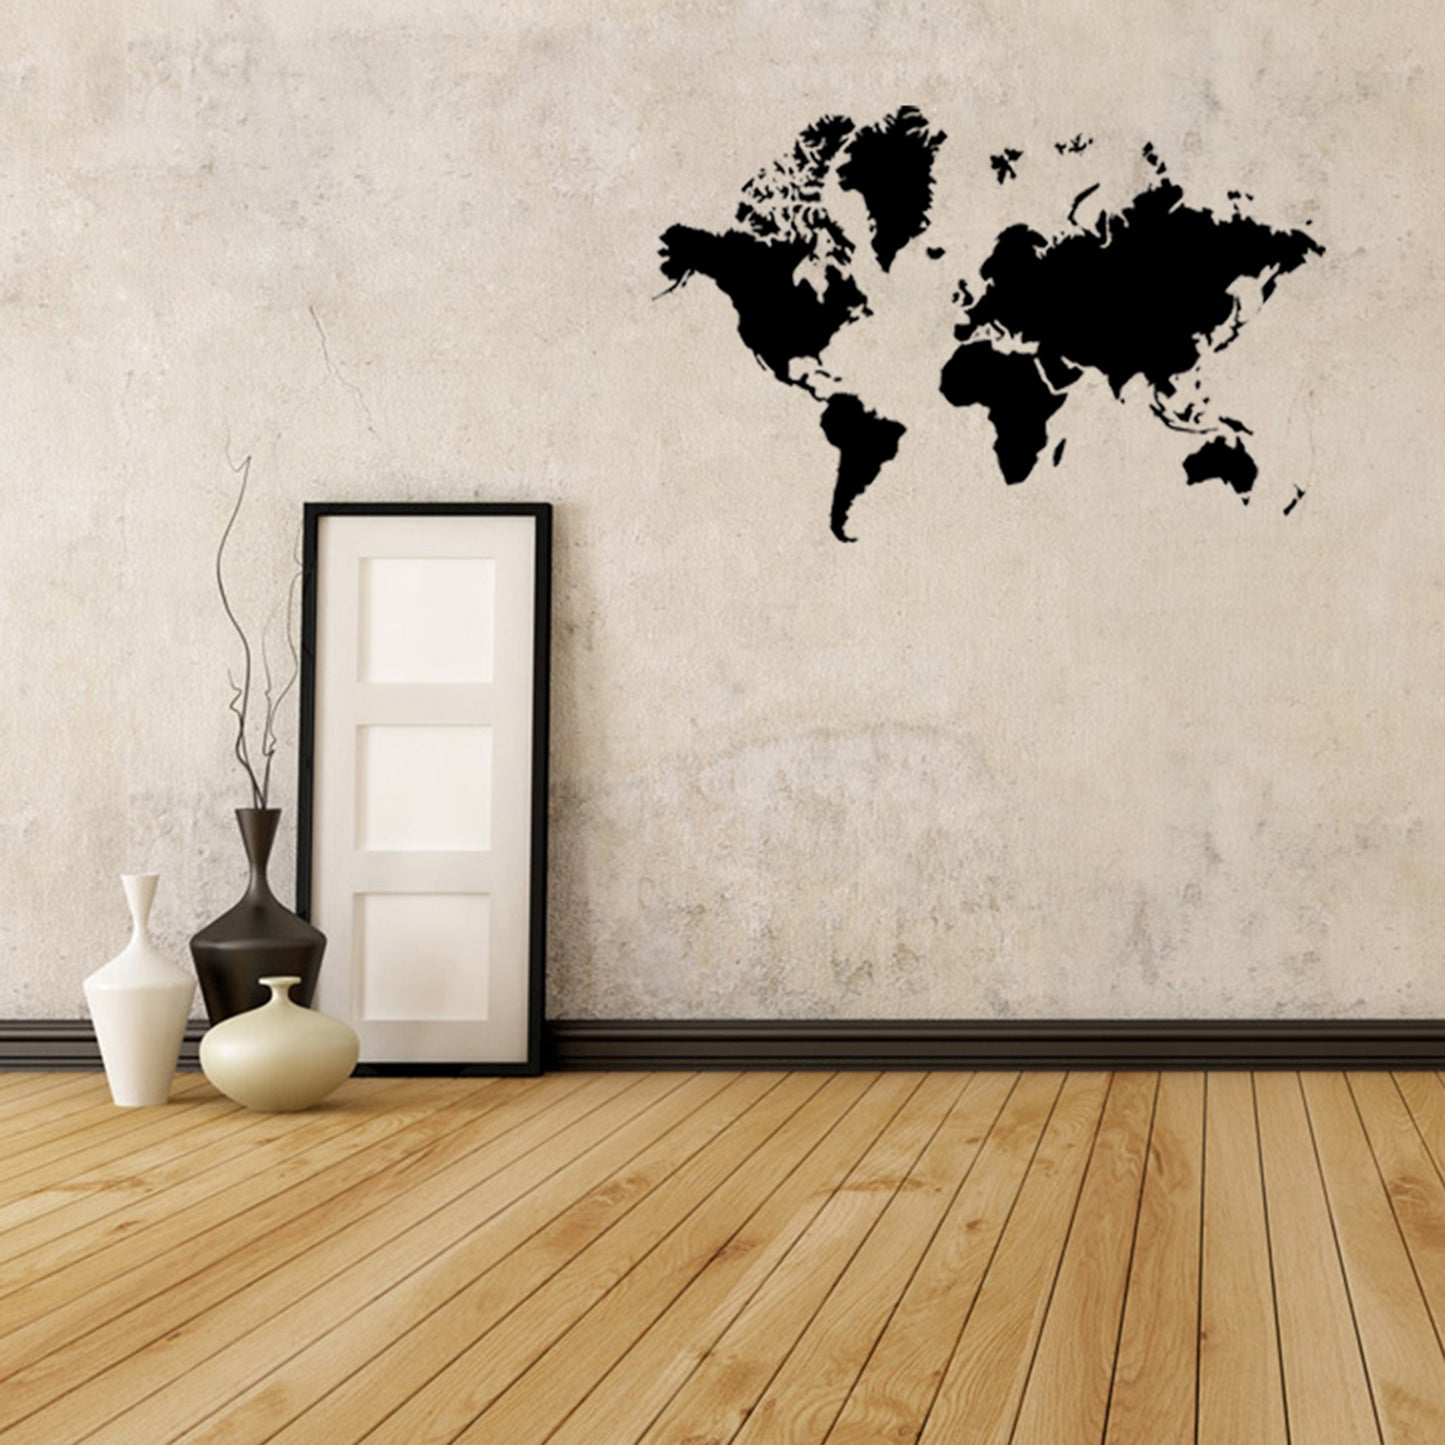 World map | Wall decal